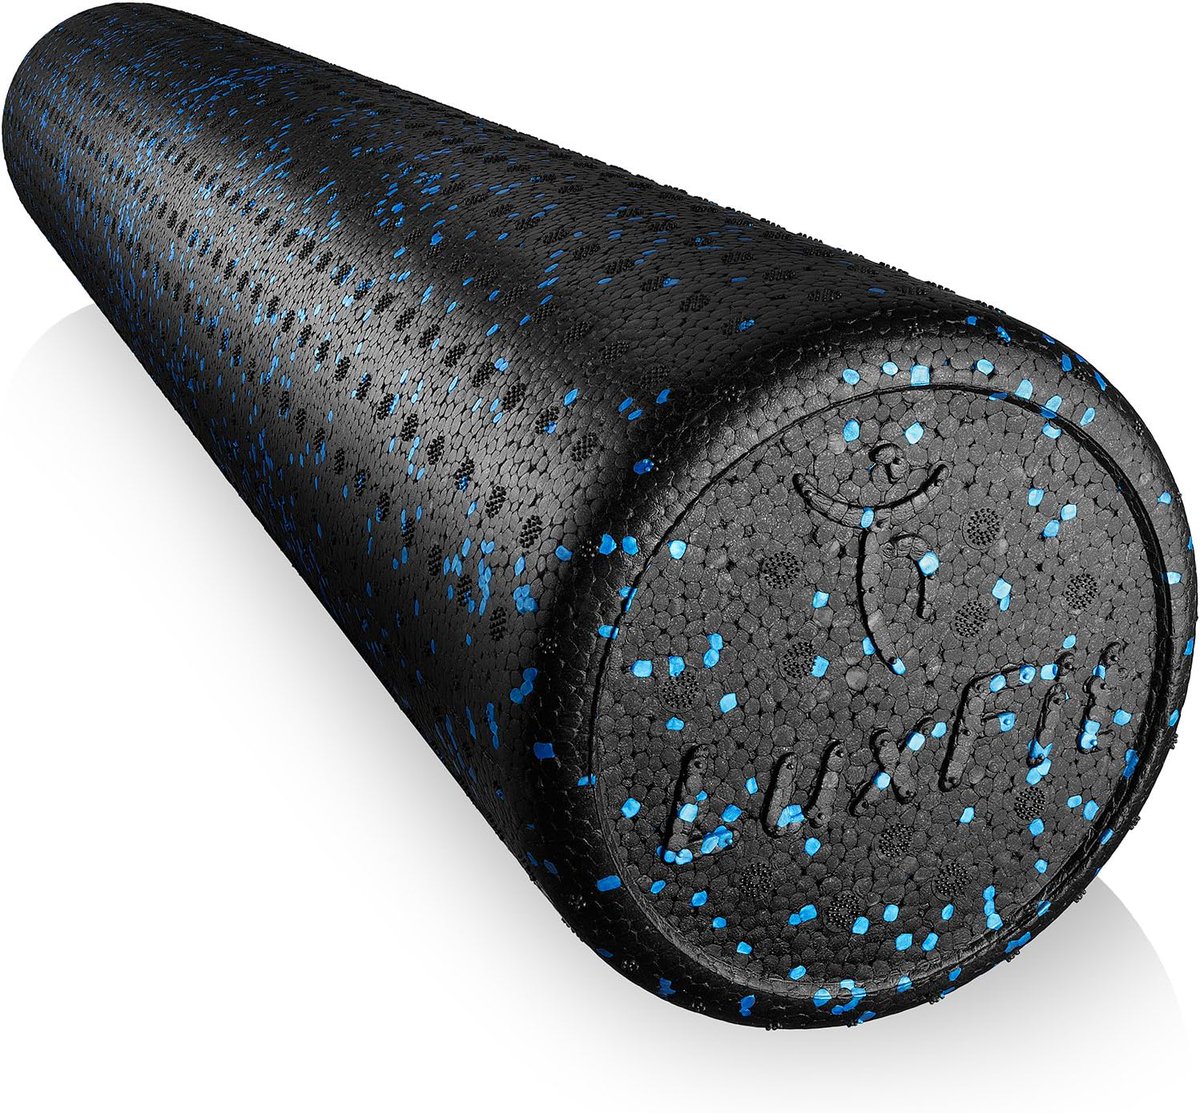 LuxFit Foam Roller (Blue) for $24.95 (Reg $69.95)
Click here: amzn.to/3YbEnj0

#LuxFitFoamRoller #FoamRolling #MuscleRecovery #FitnessEssentials #SelfMassage #RollOutTheKnots #RelaxAndRecover #FitnessRecovery #DealsForYou